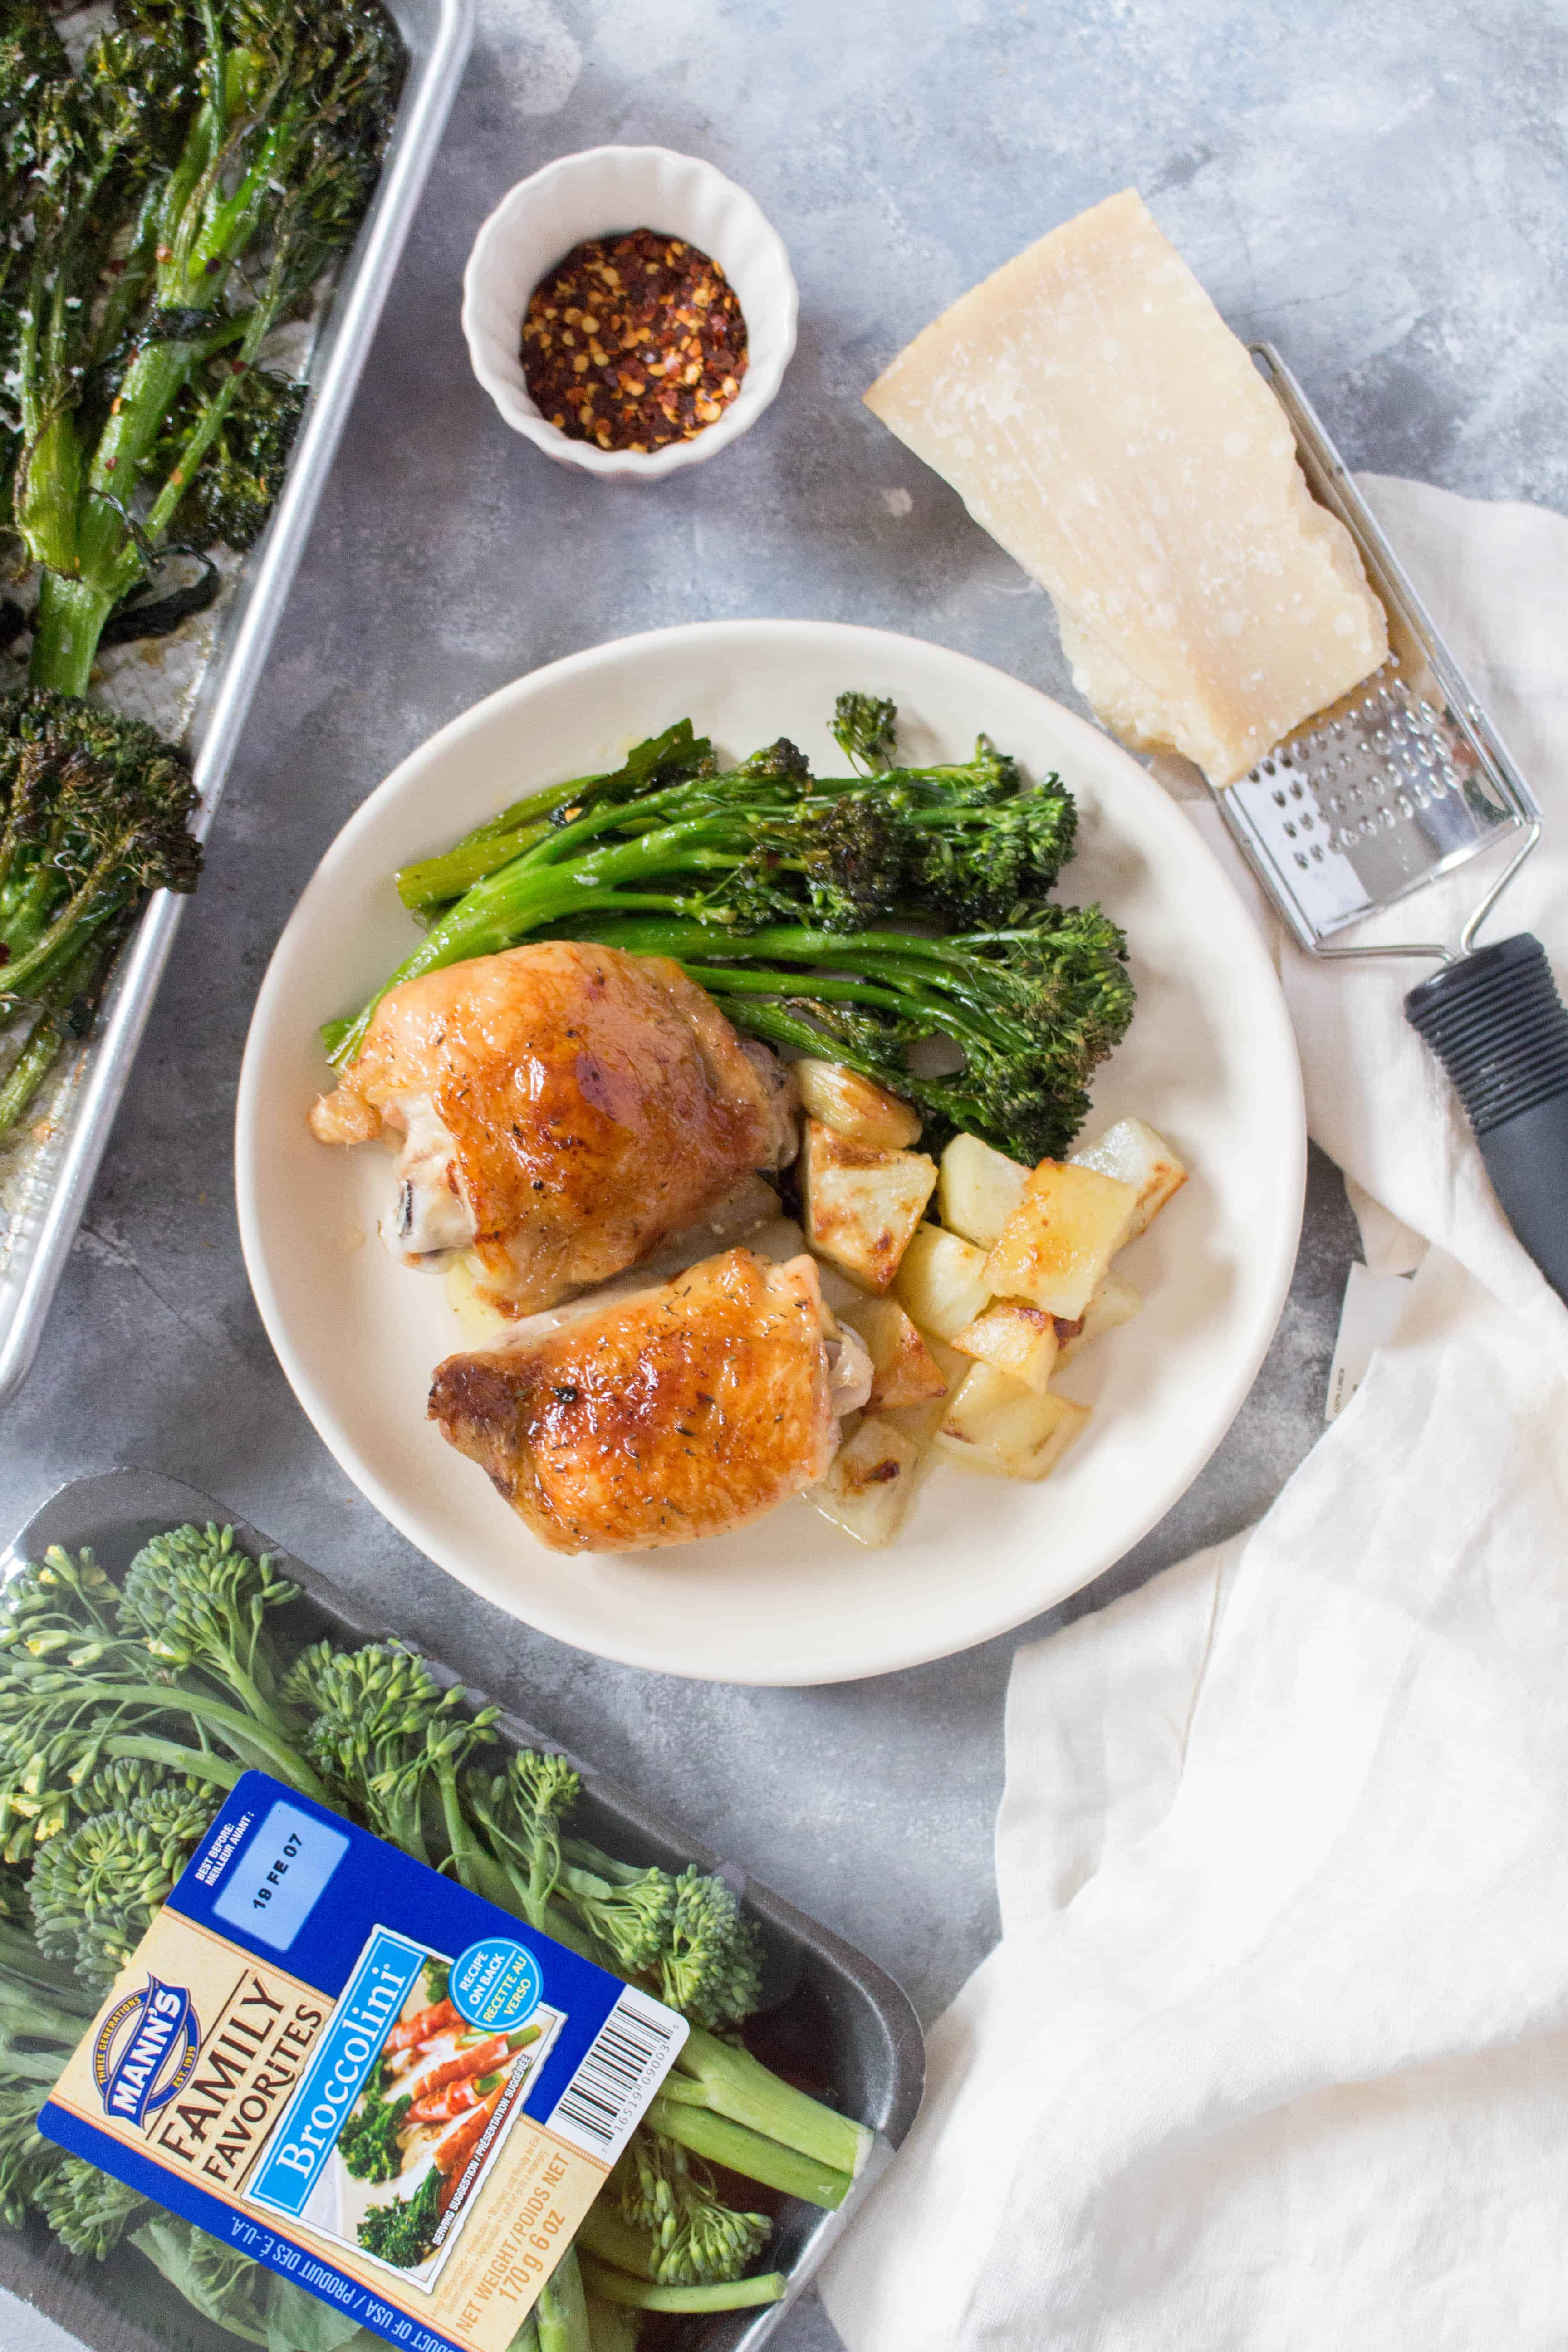 This Herb Chicken with Broccolini Meal Prep is an easy dish to throw together quickly on a busy weekend so you don't spend all day meal prepping! 